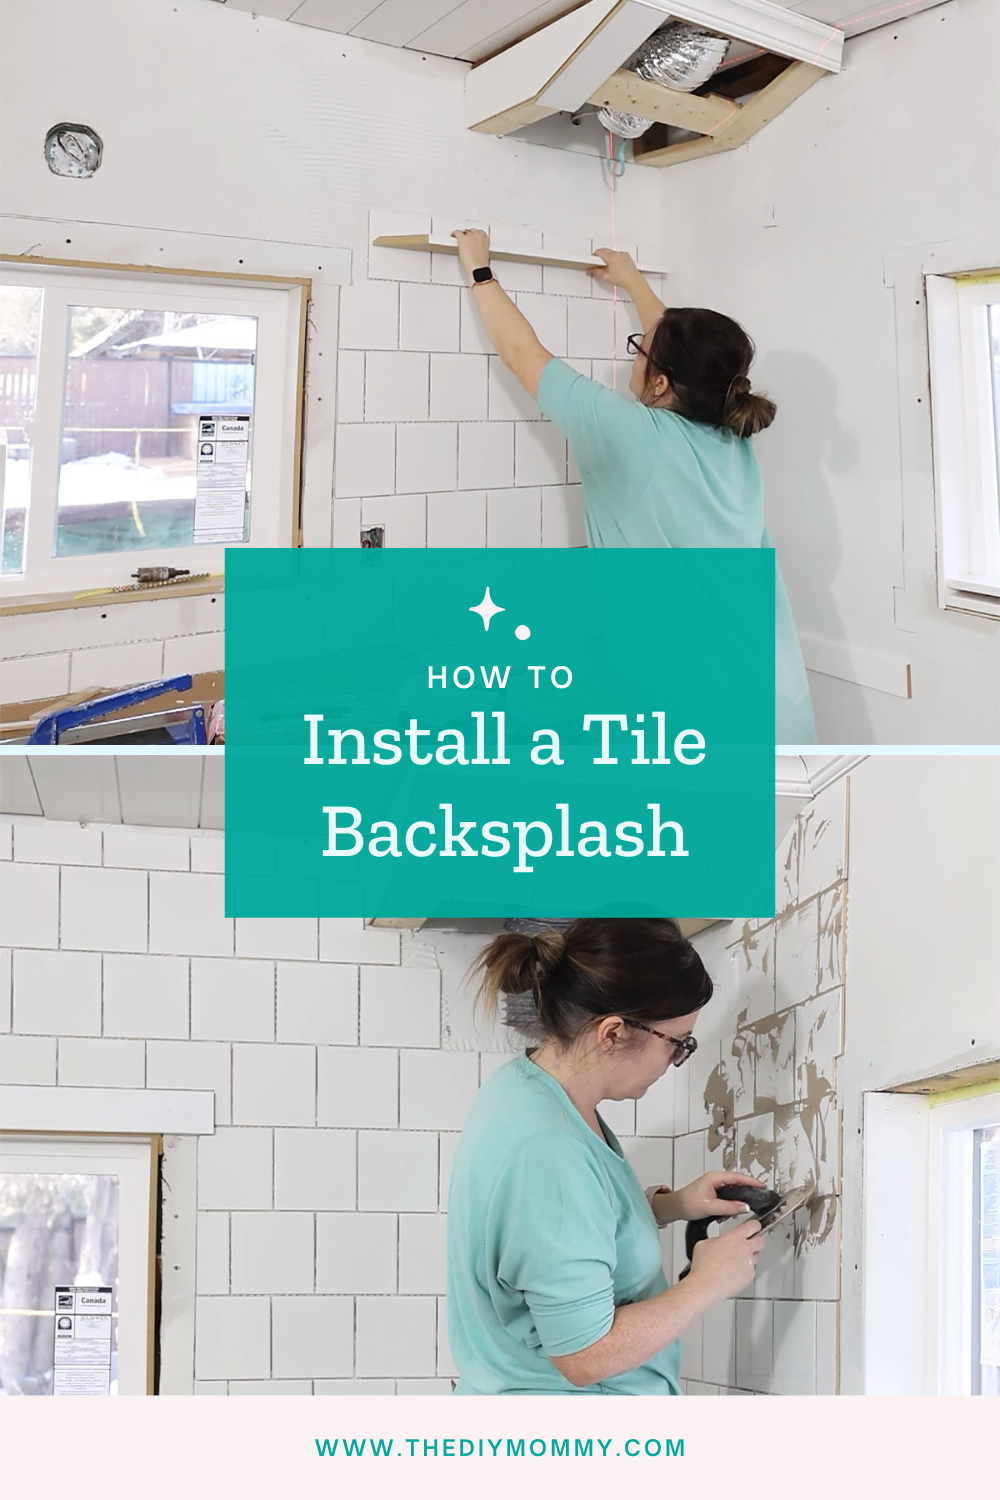 How to Install Kitchen Backsplash Tile: An Easy Guide